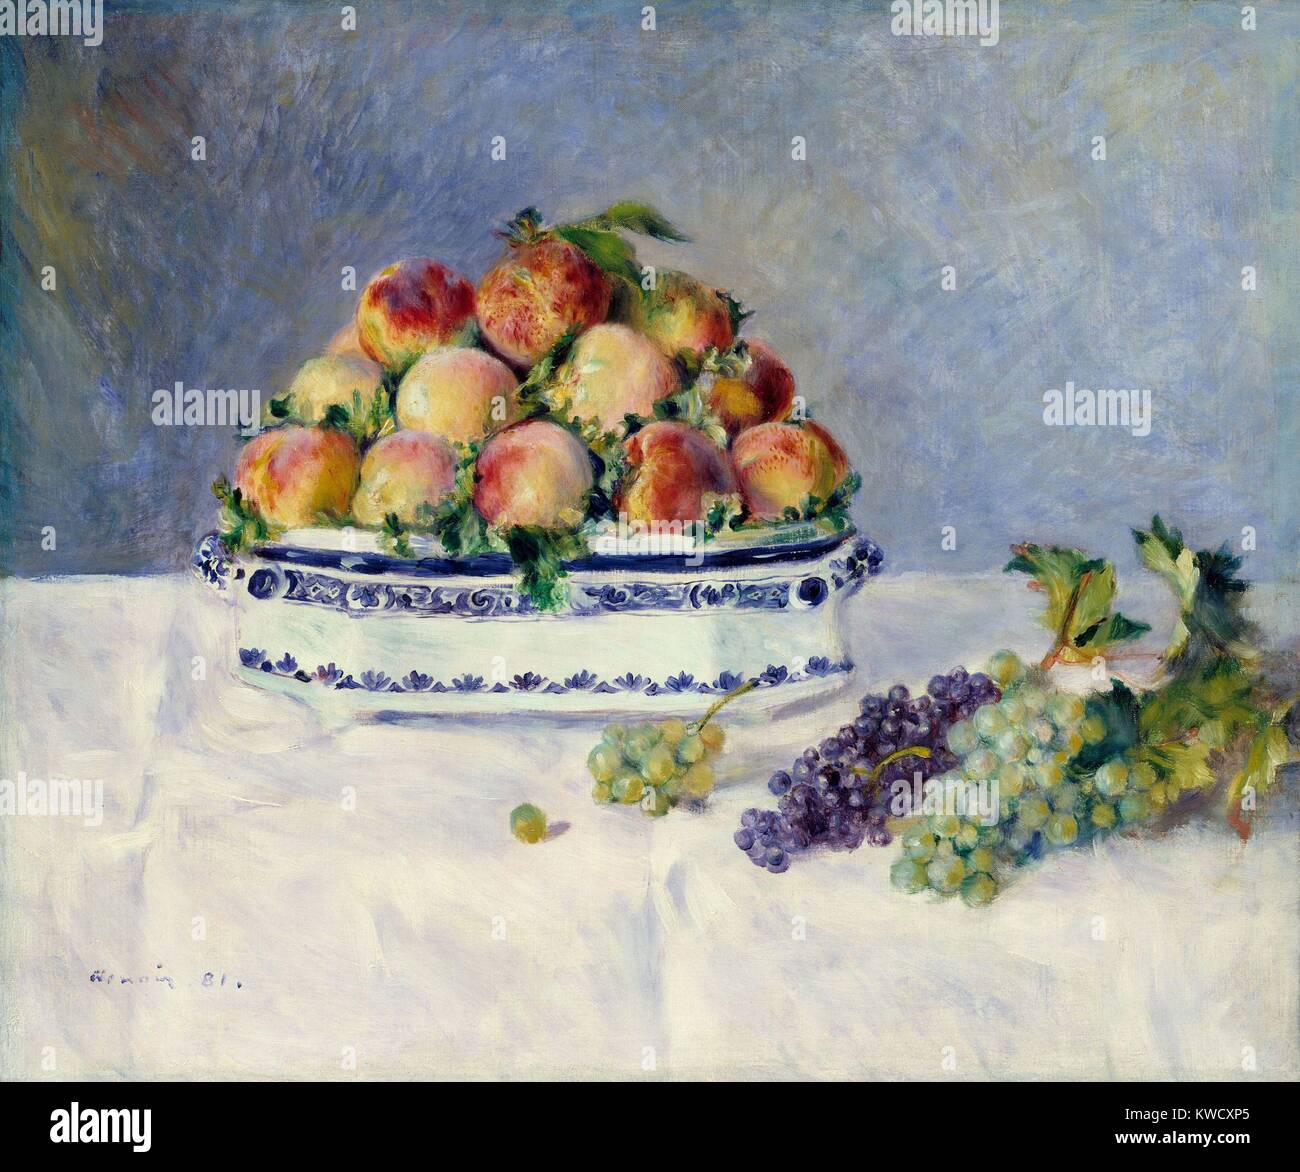 Still Life with Peaches and Grapes, by Auguste Renoir, 1881, French impressionist oil painting. This still life of peaches was painted when Renoir was a guest of art patron Paul Berard, who purchased it (BSLOC 2017 3 84) Stock Photo